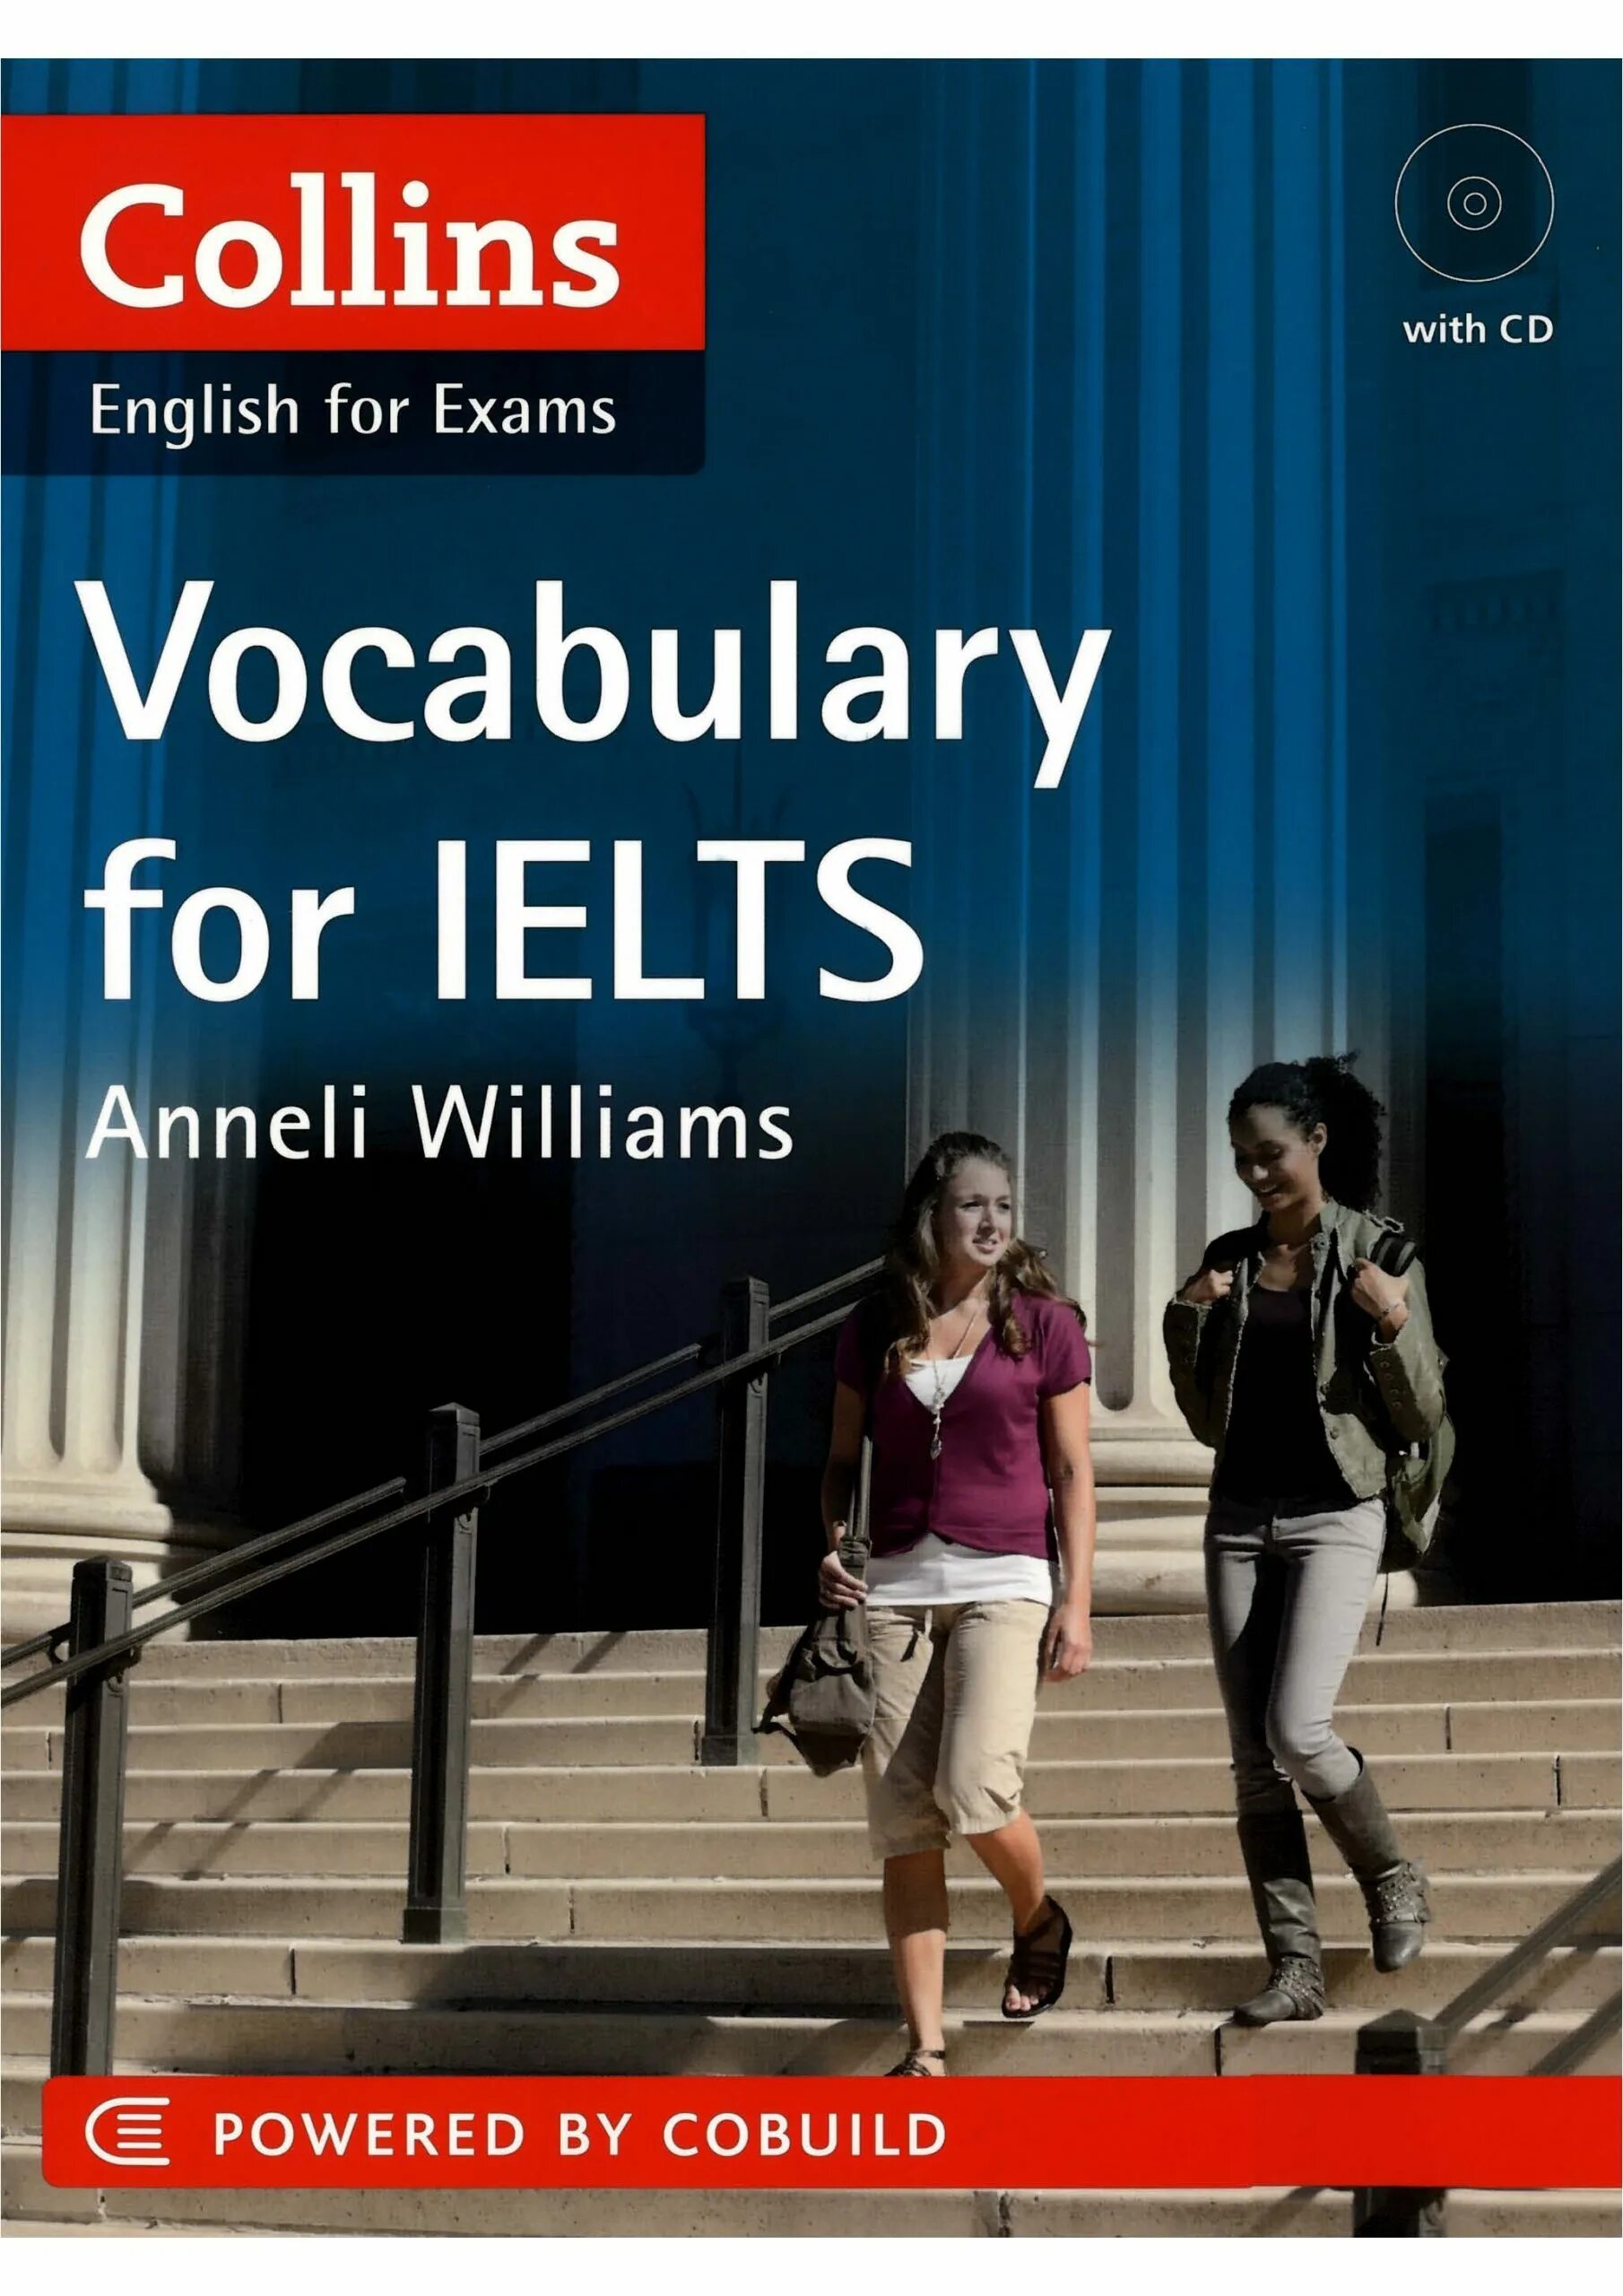 Exams vocabulary. Vocabulary for IELTS. Colins Vocabulary for IELTS. Collins books for IELTS. Vocabulary for IELTS книга.